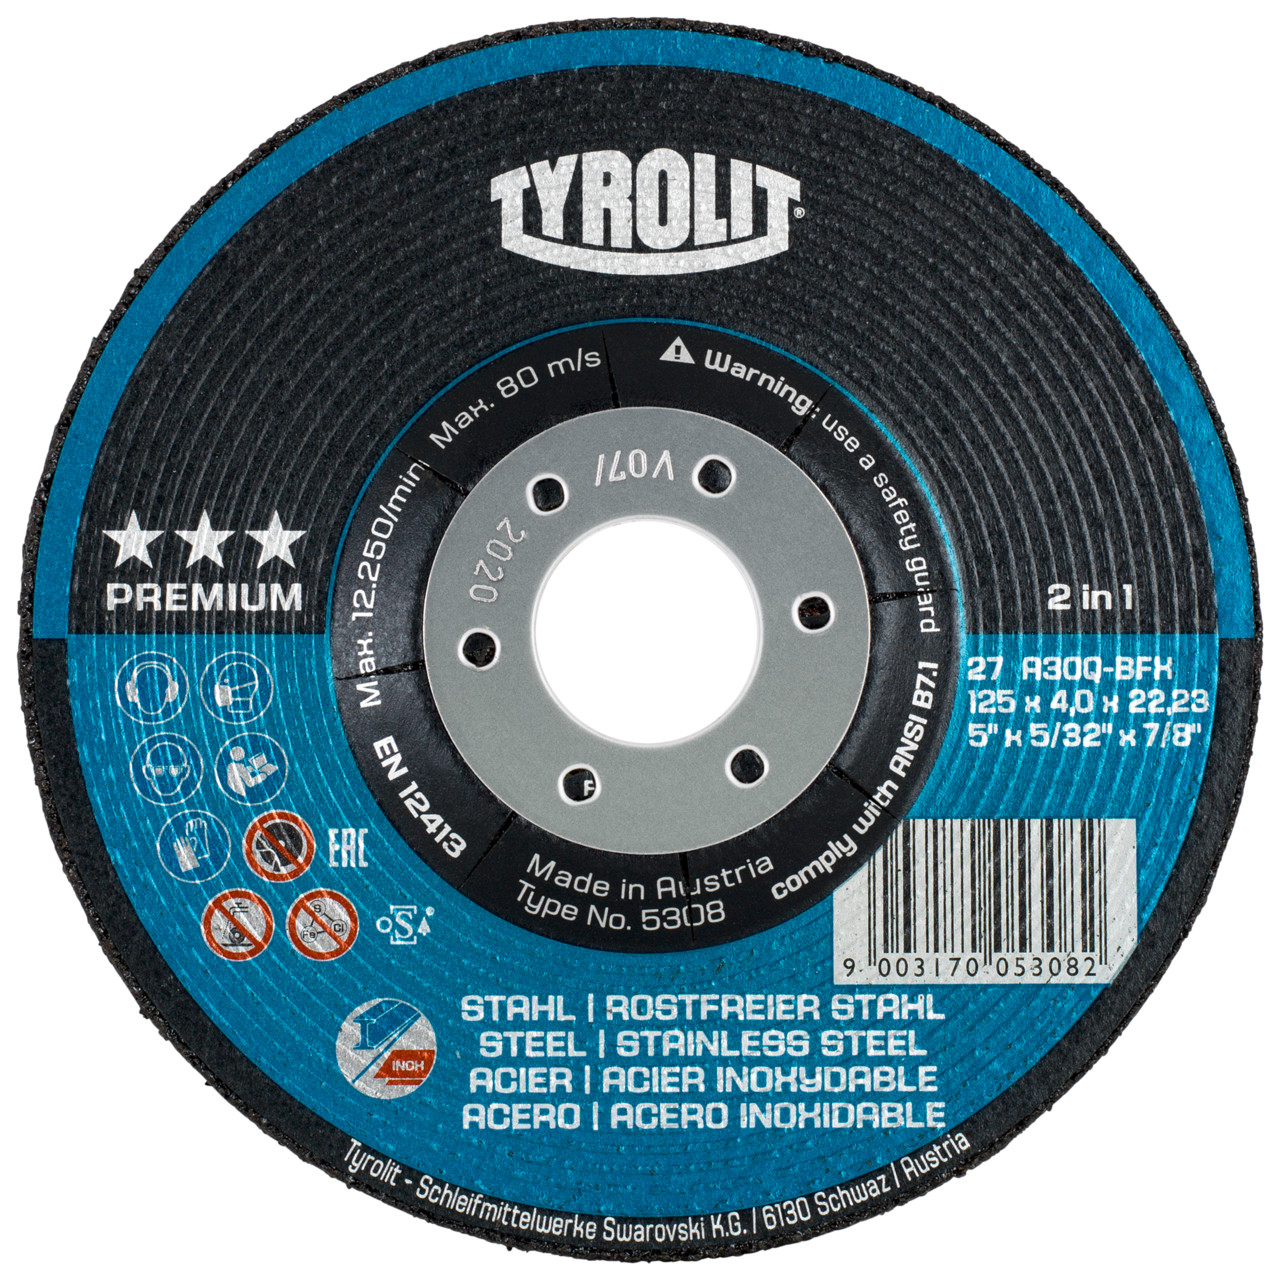 TYROLIT grinding wheel DxUxH 125x7x22.23 2in1 for steel and stainless steel, shape: 27 - offset version, Art. 34046131